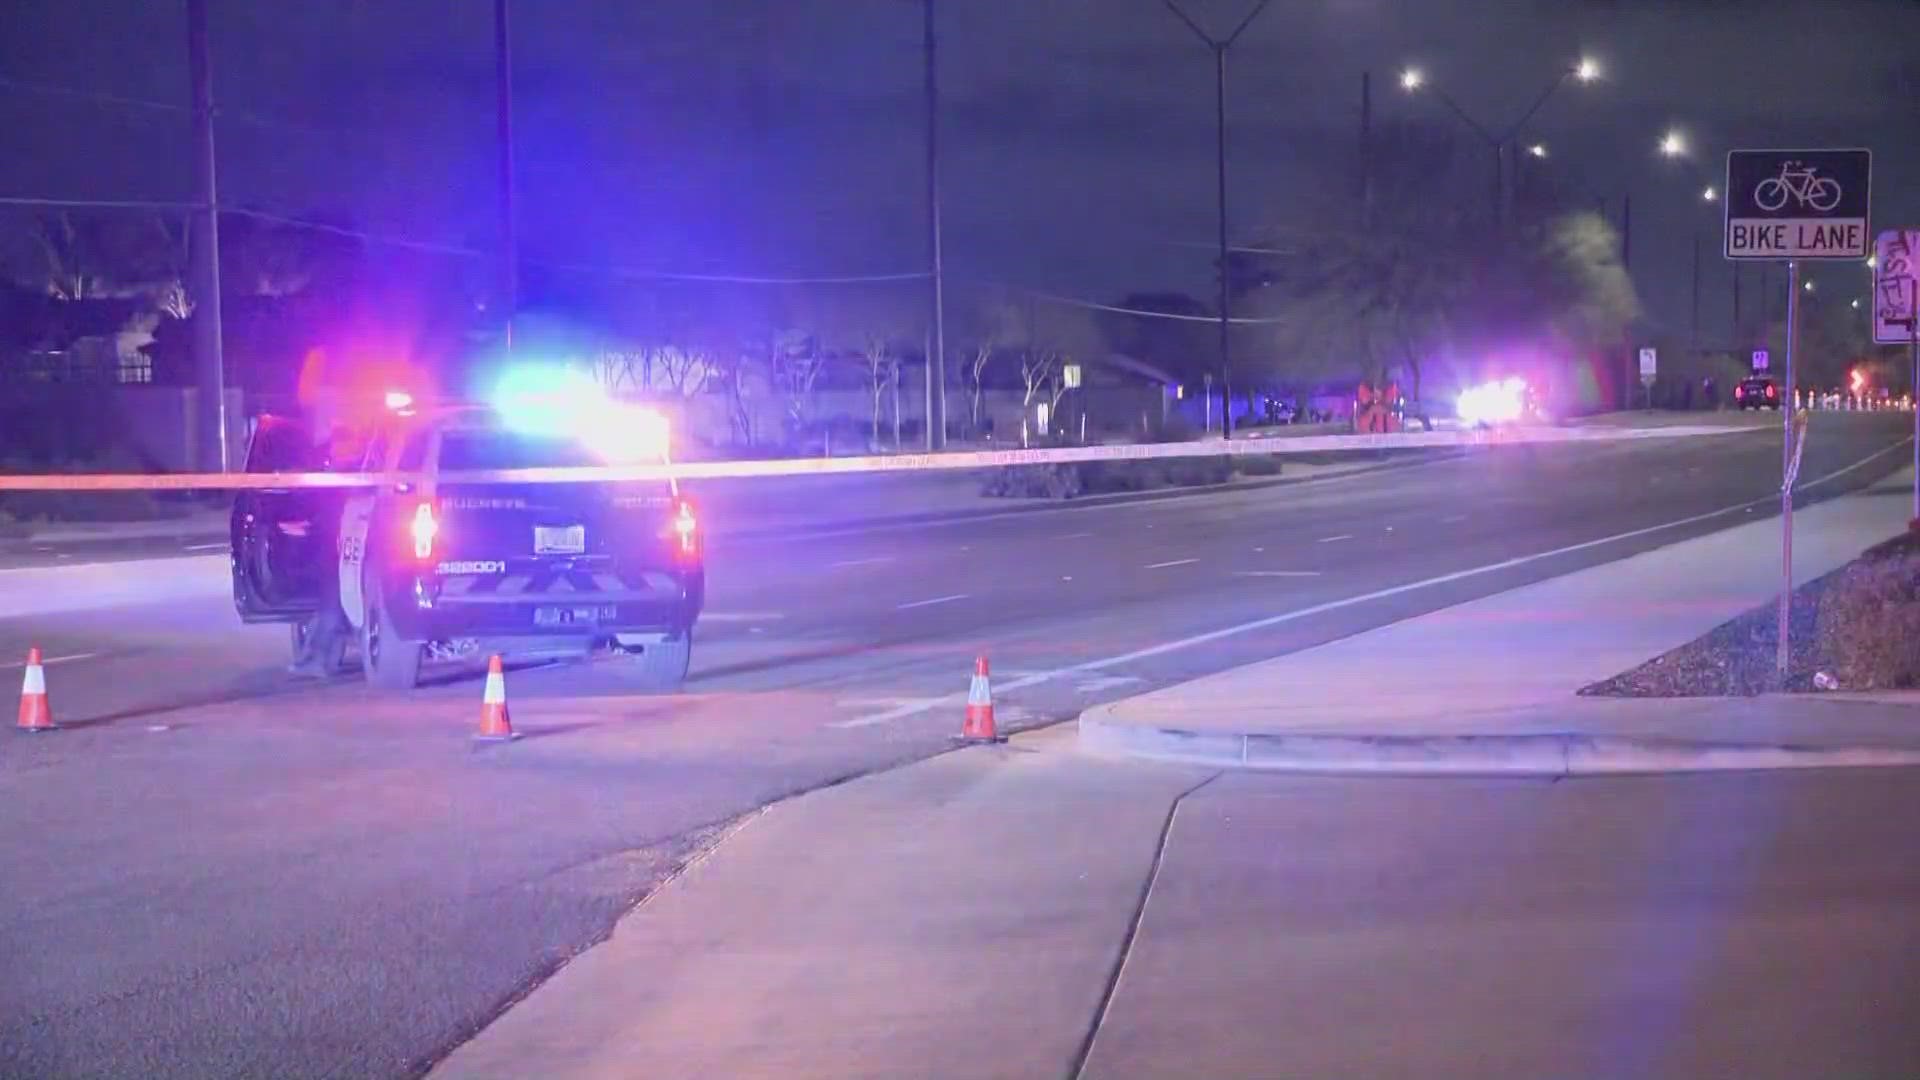 Officers shot the man after he refused to drop a gun, the Goodyear police said. The man is reportedly believed to be the main suspect in a separate recent shooting.